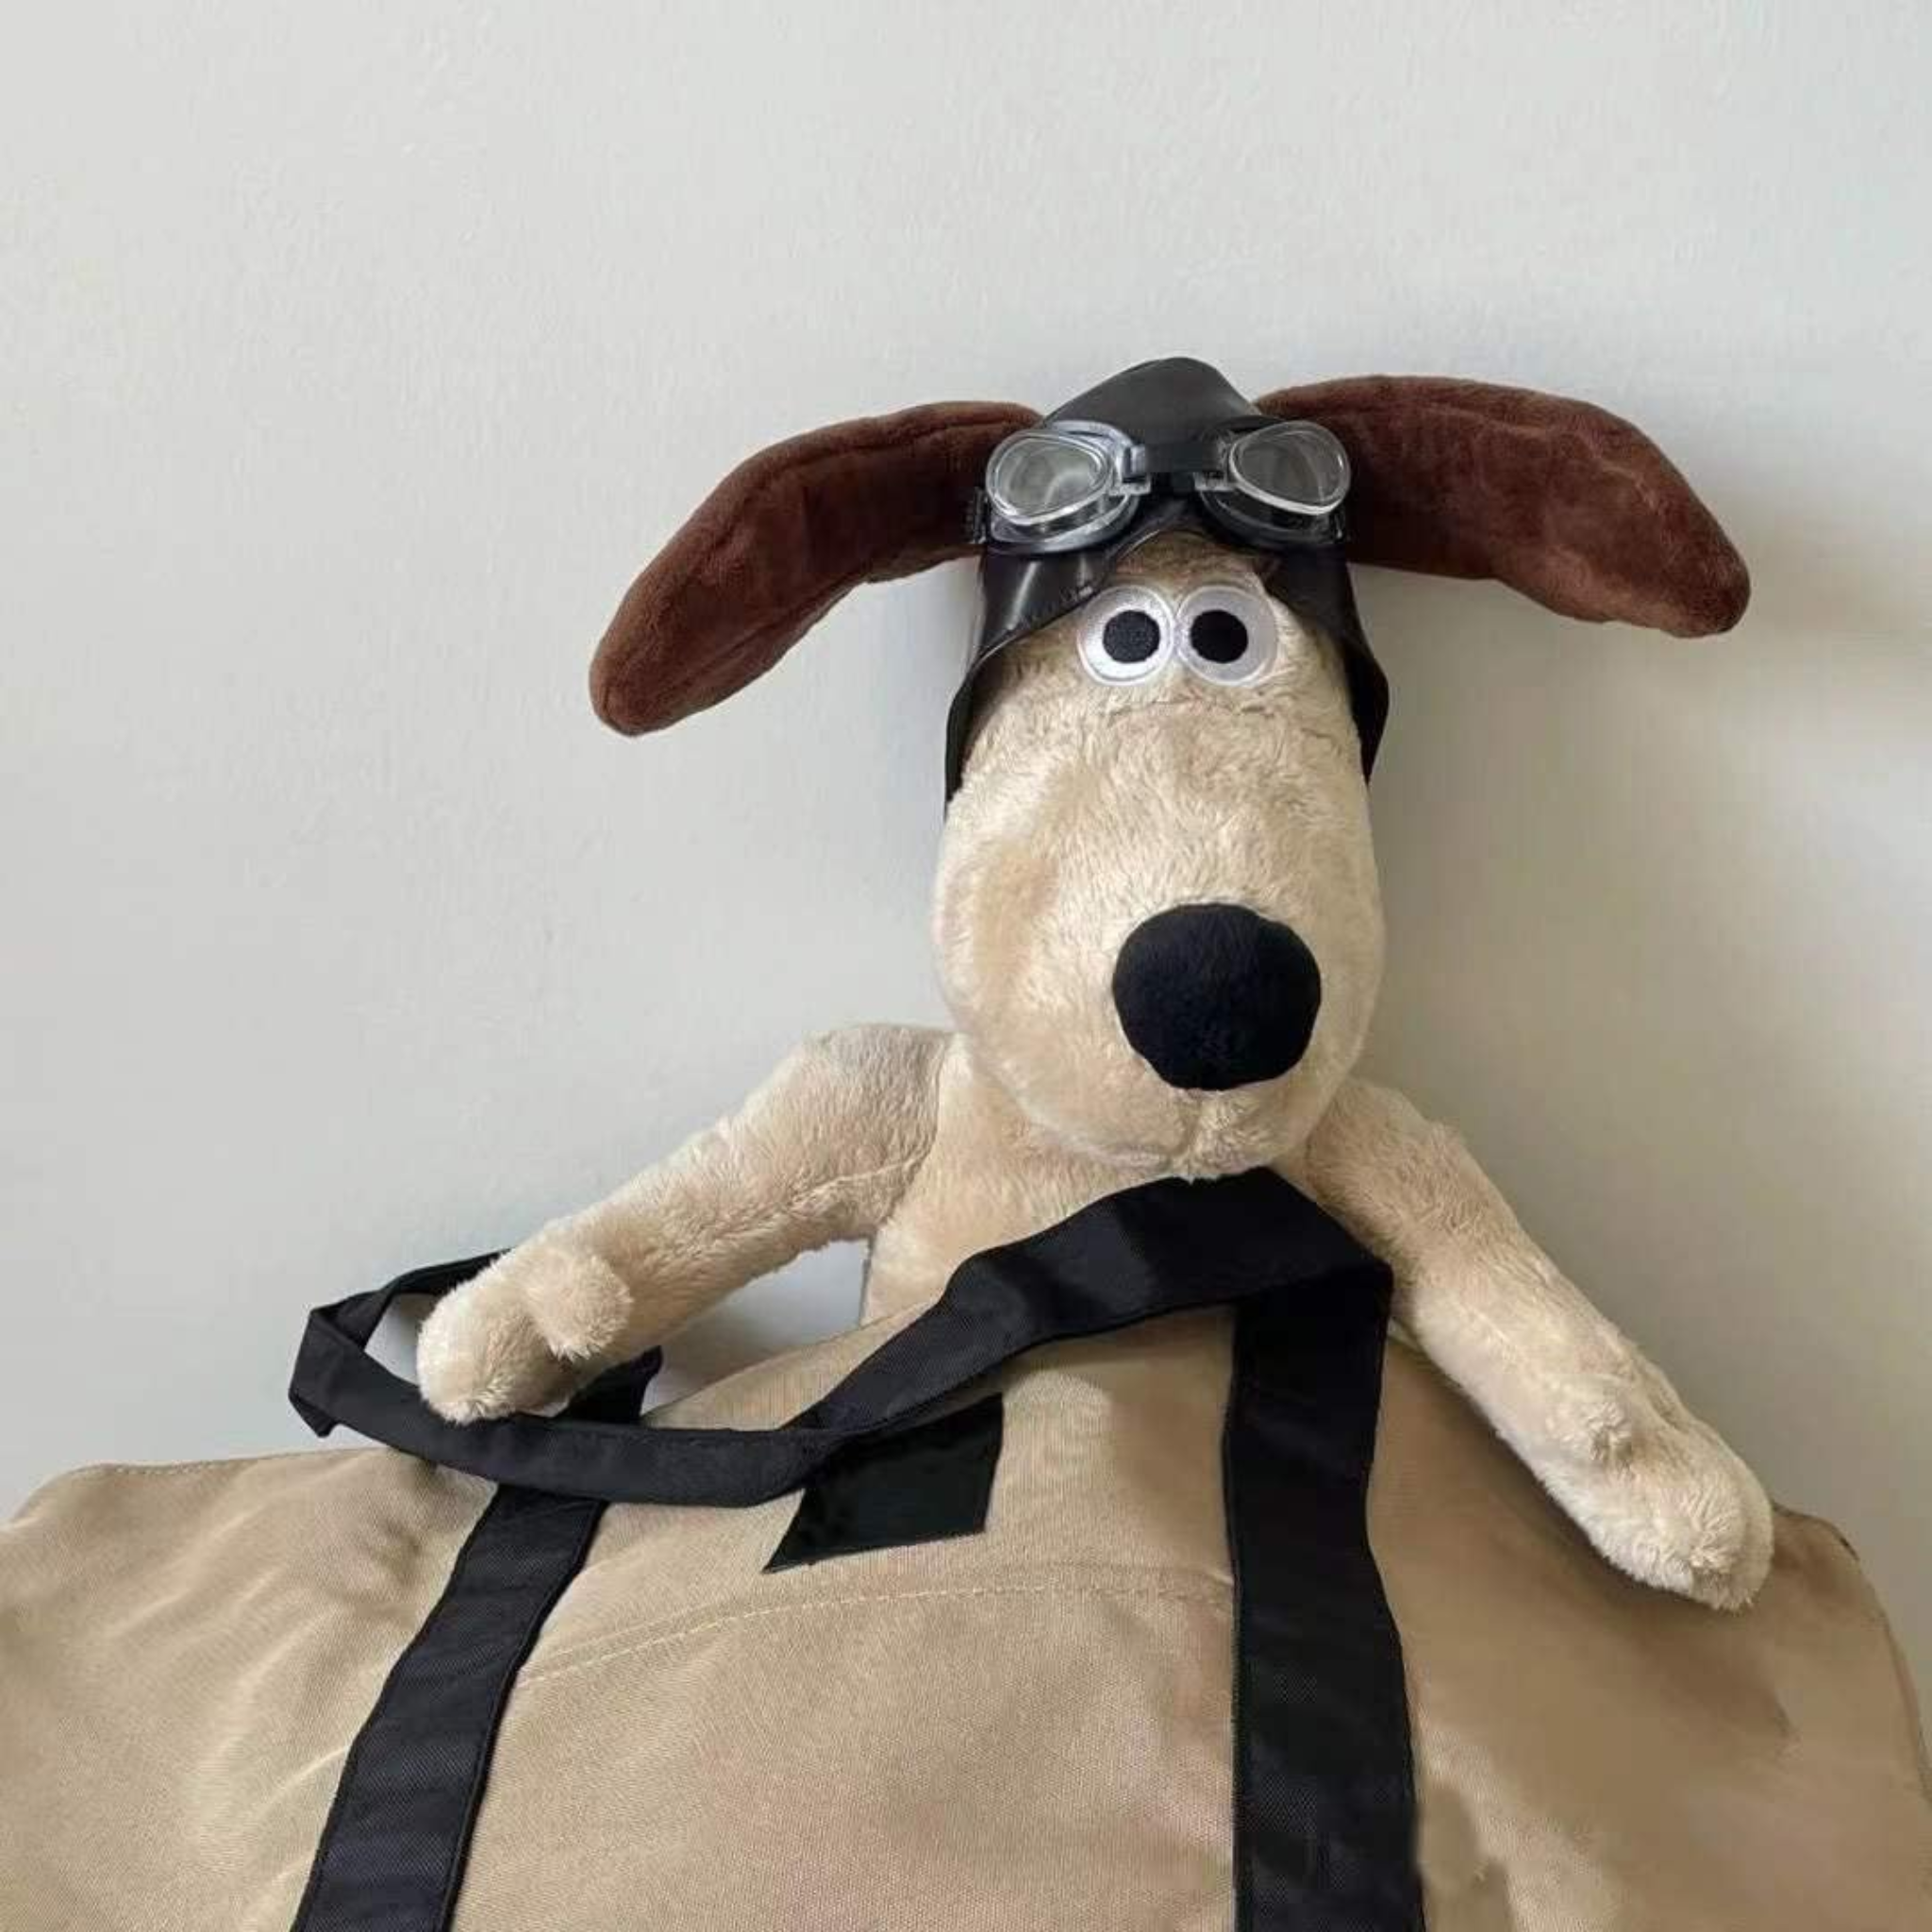 Adorably Crafted Gromit Plush Toy